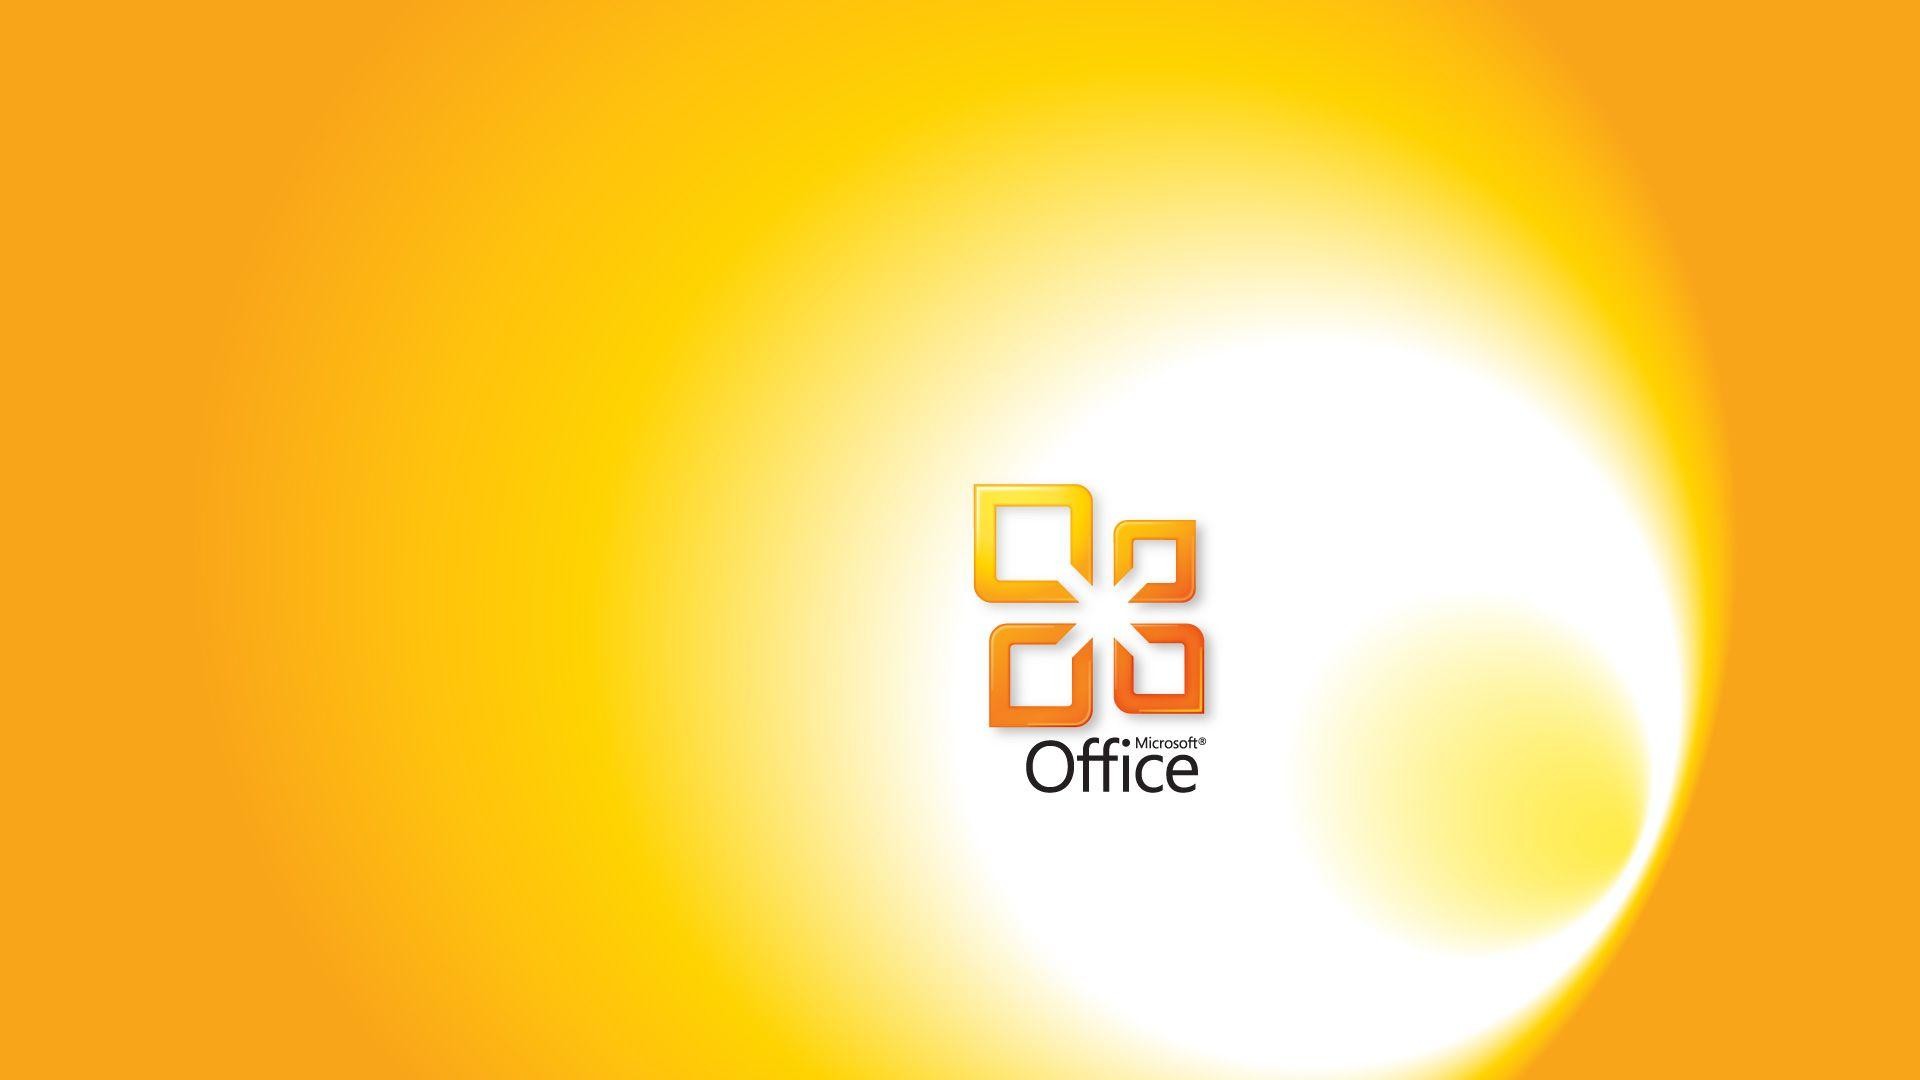 Office Space Windows Background Wallpaper